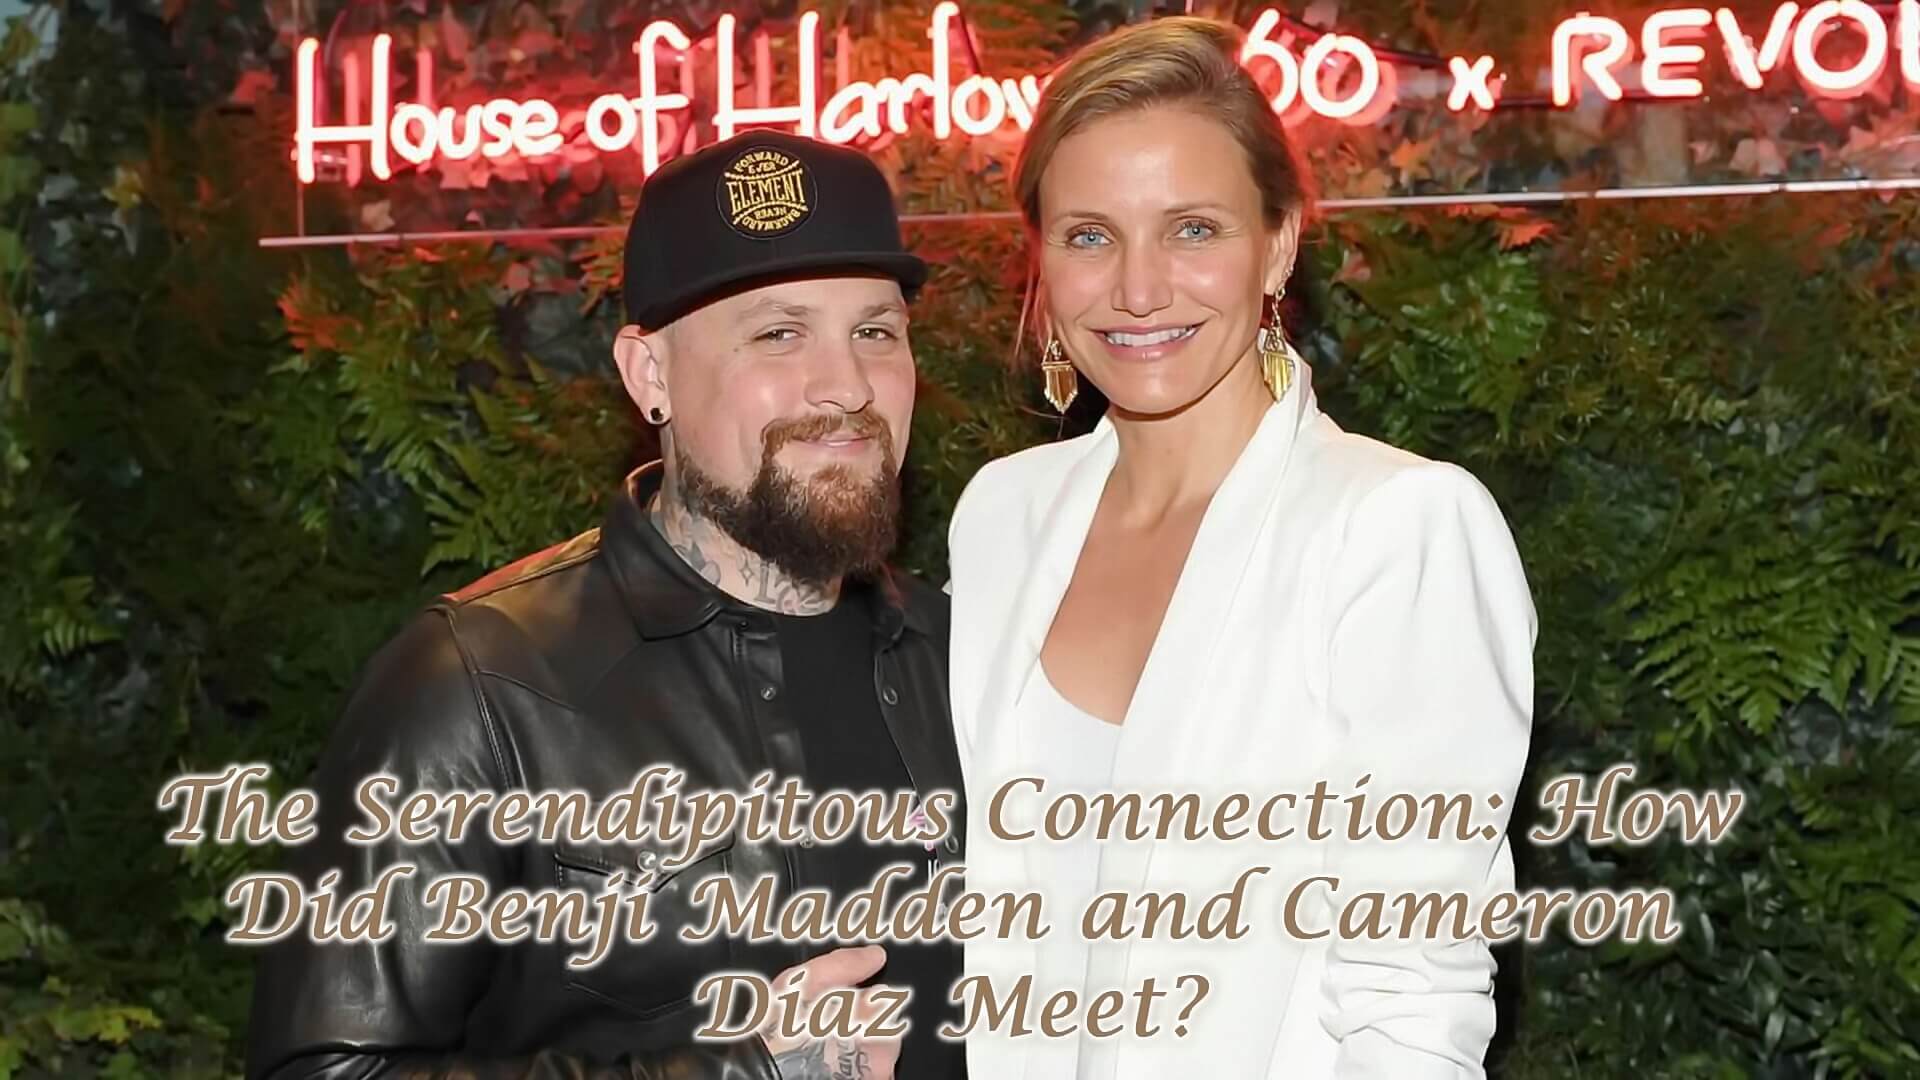 The Serendipitous Connection: How Did Benji Madden and Cameron Diaz Meet?